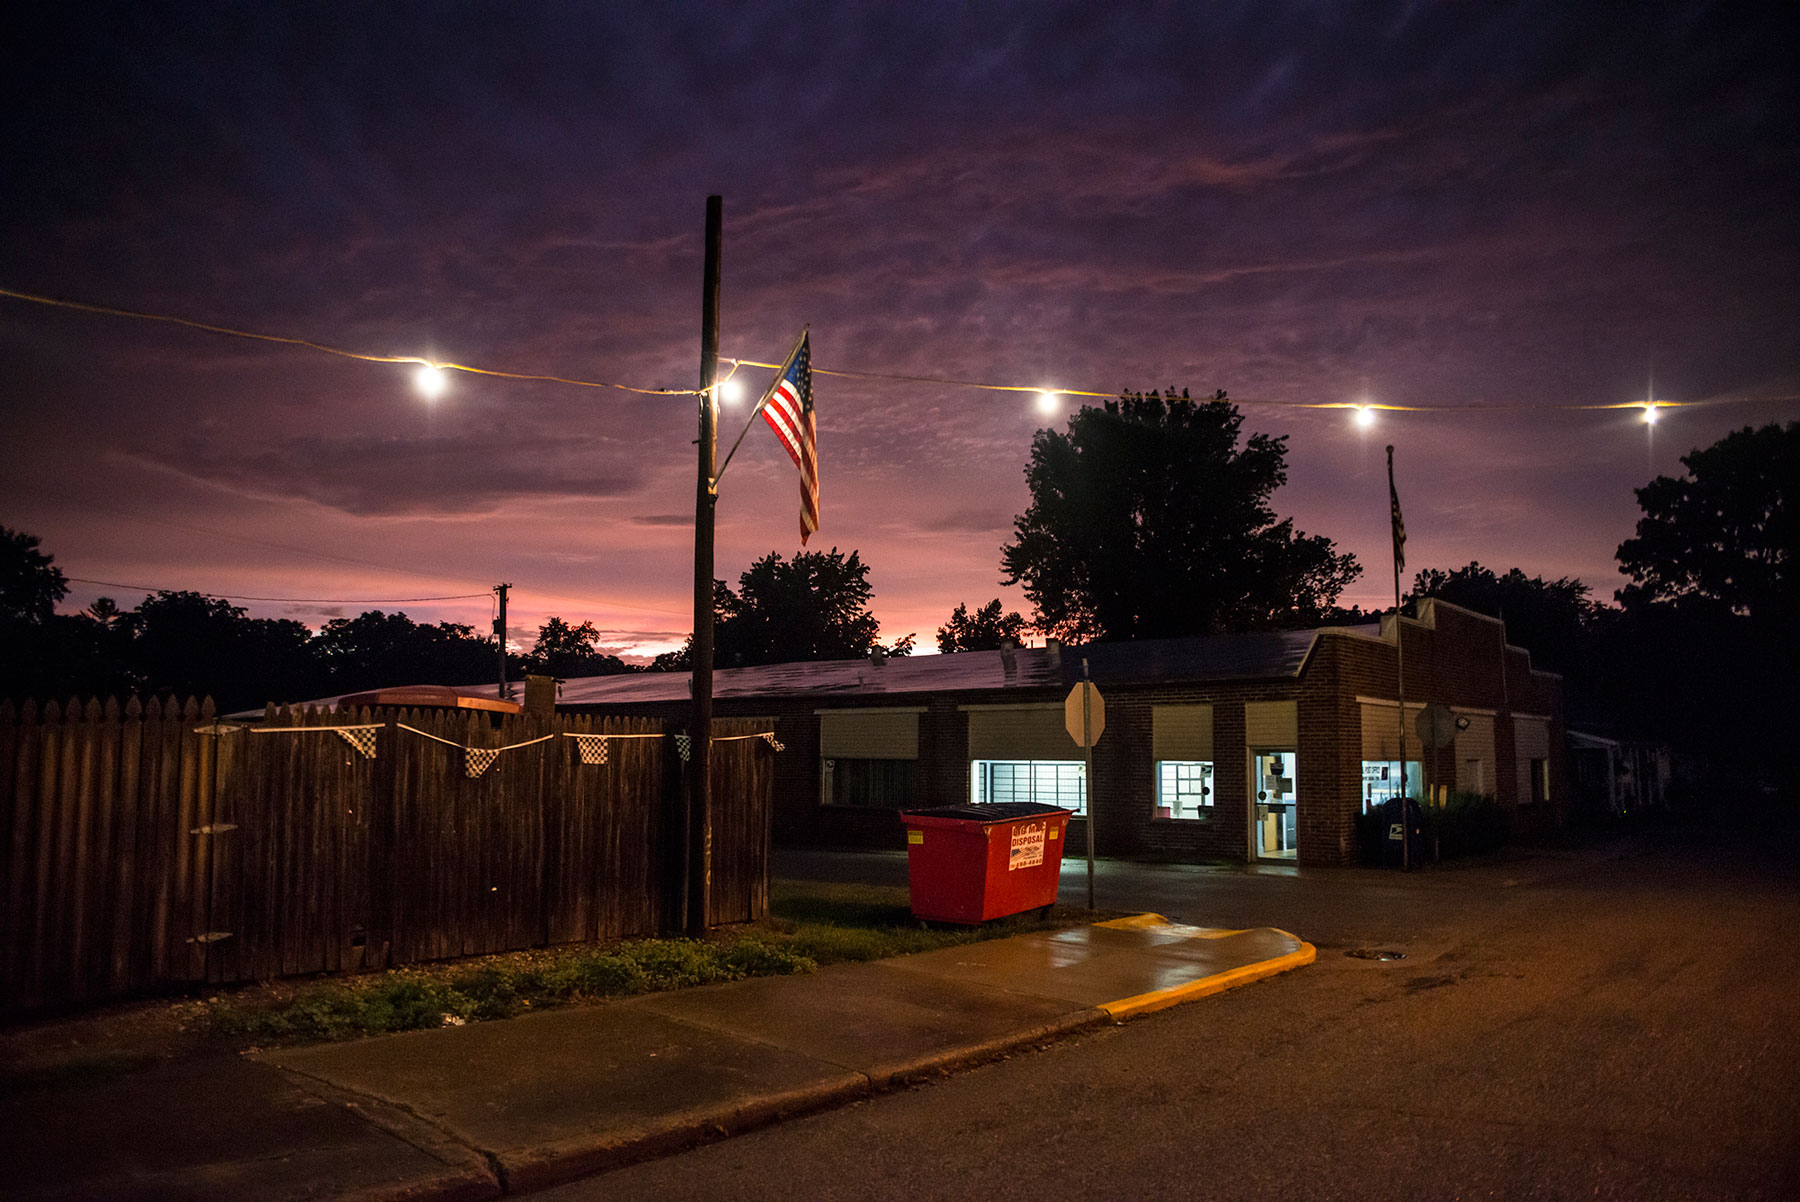 A brilliant sunset fades after a thunderstorm in Newport, Indiana. Residents said they did not have trouble voting because the small-town atmosphere means poll workers know all the townspeople, making it easier to prove their identity at the polls. Indiana was the first state to pass a strict photo ID law. (Roman Knertser/News21)